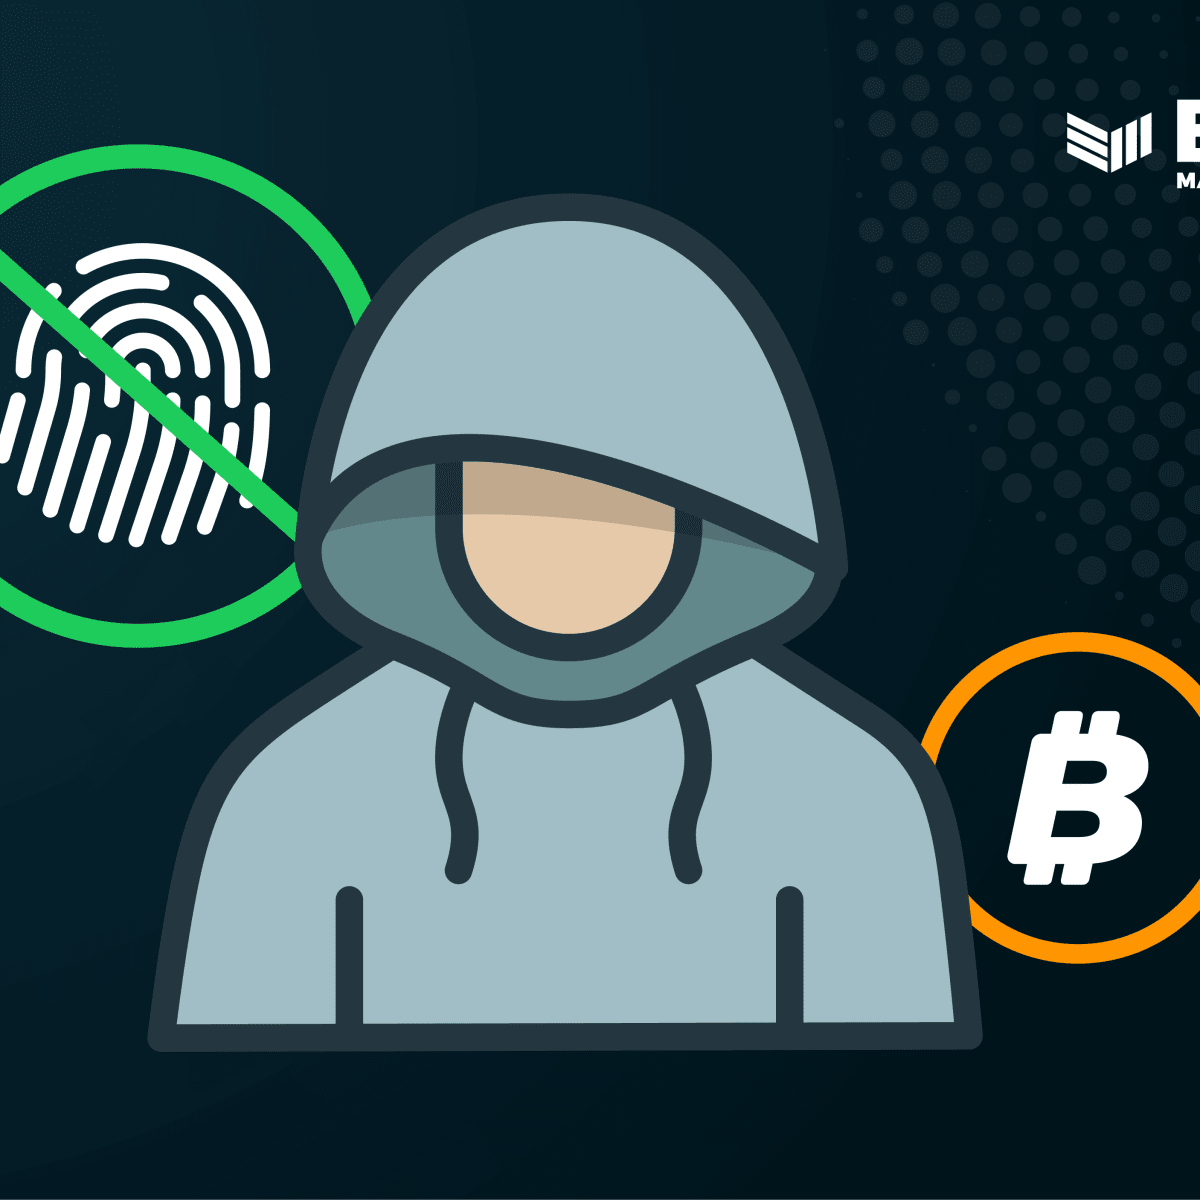 How to buy and pay with bitcoin anonymously | Comparitech